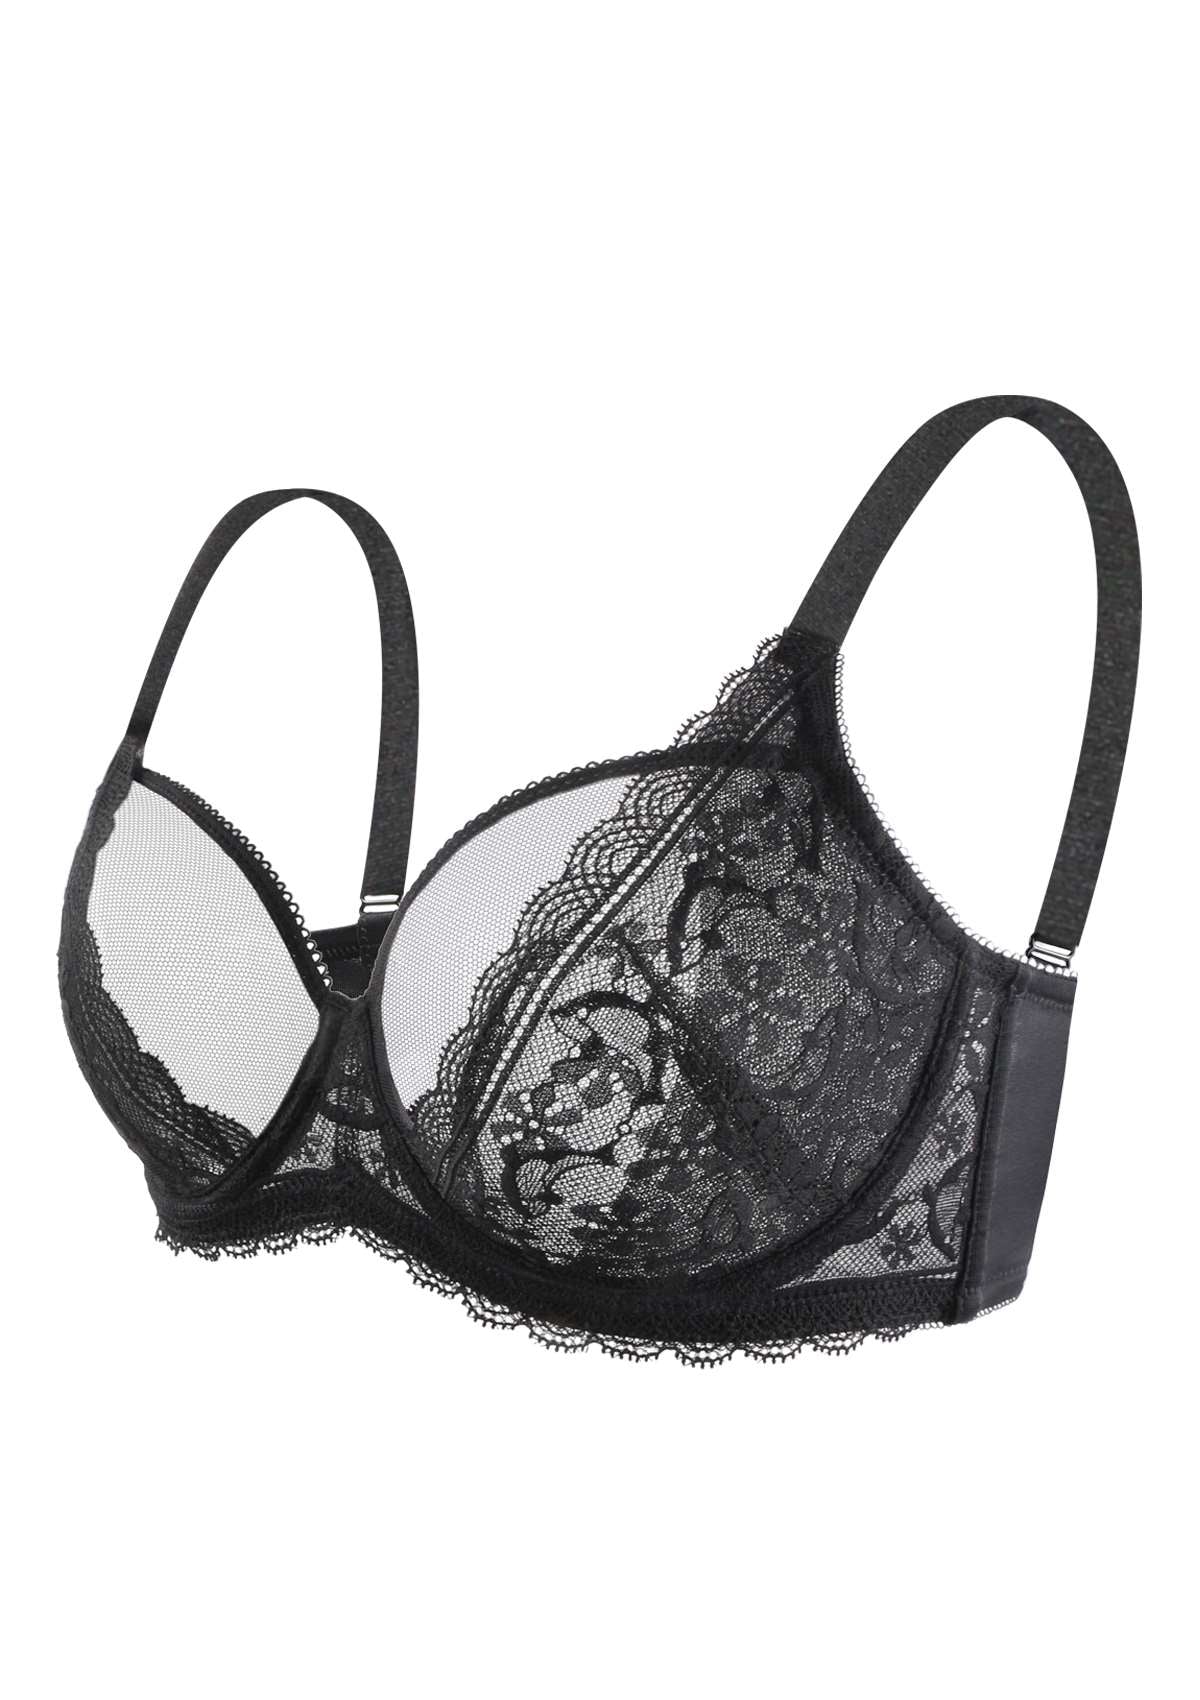 HSIA Anemone Lace Bra And Panties: Back Support Wired Bra - Black / 40 / DDD/F